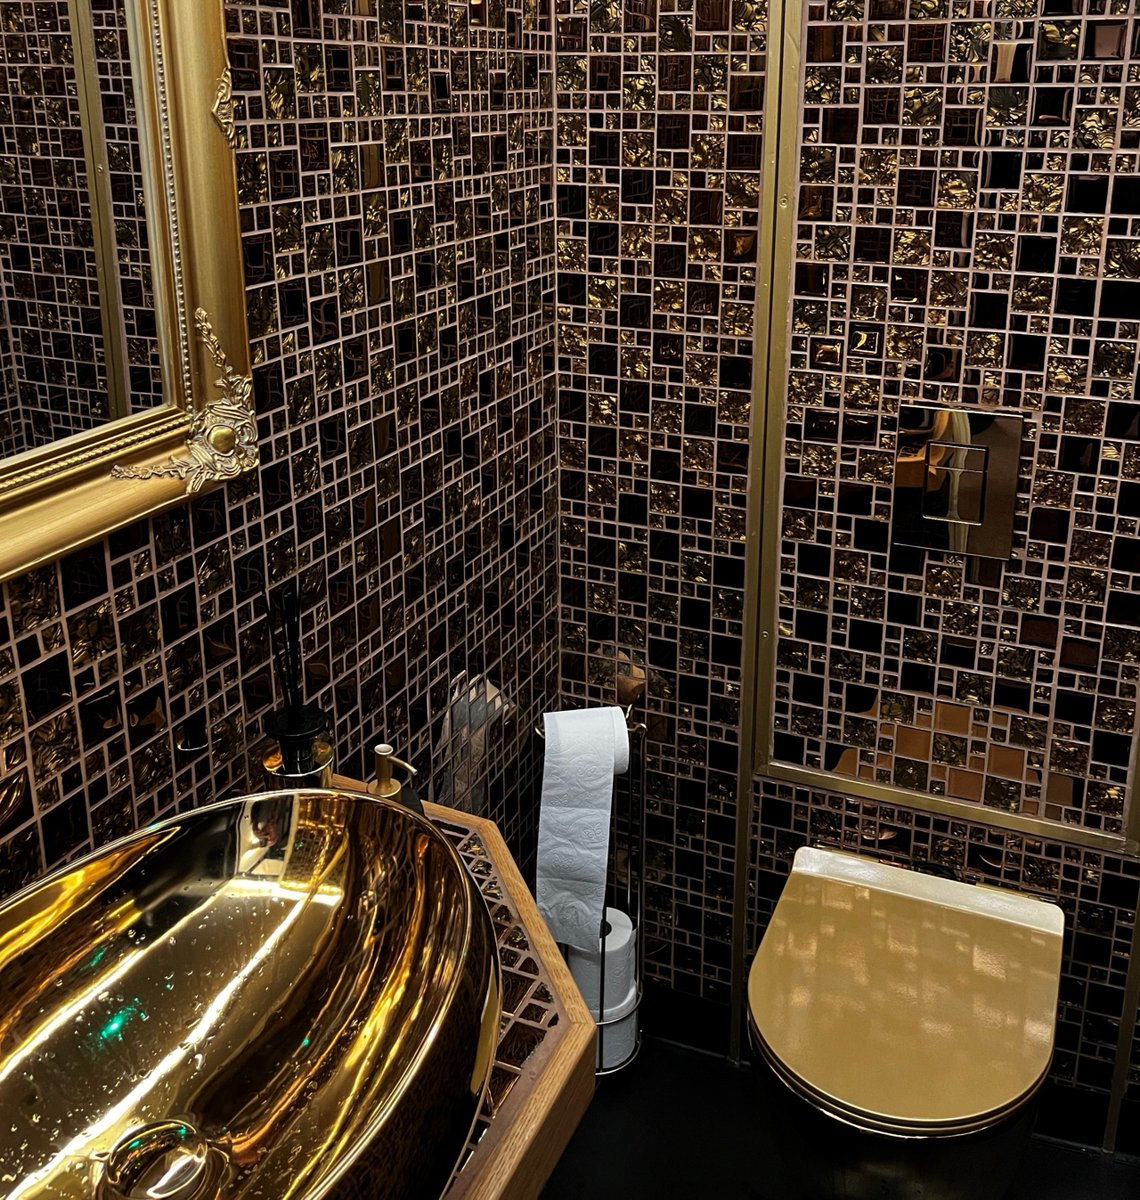 We love tiles in all forms, and the stories behind some. So when we spot them on our travels we love to capture them. 

For example check out these mega-bling gold tiles in Fletchers House Restaurant, Rye, Sussex. Wow

Why not share your #TilesTravels with us?